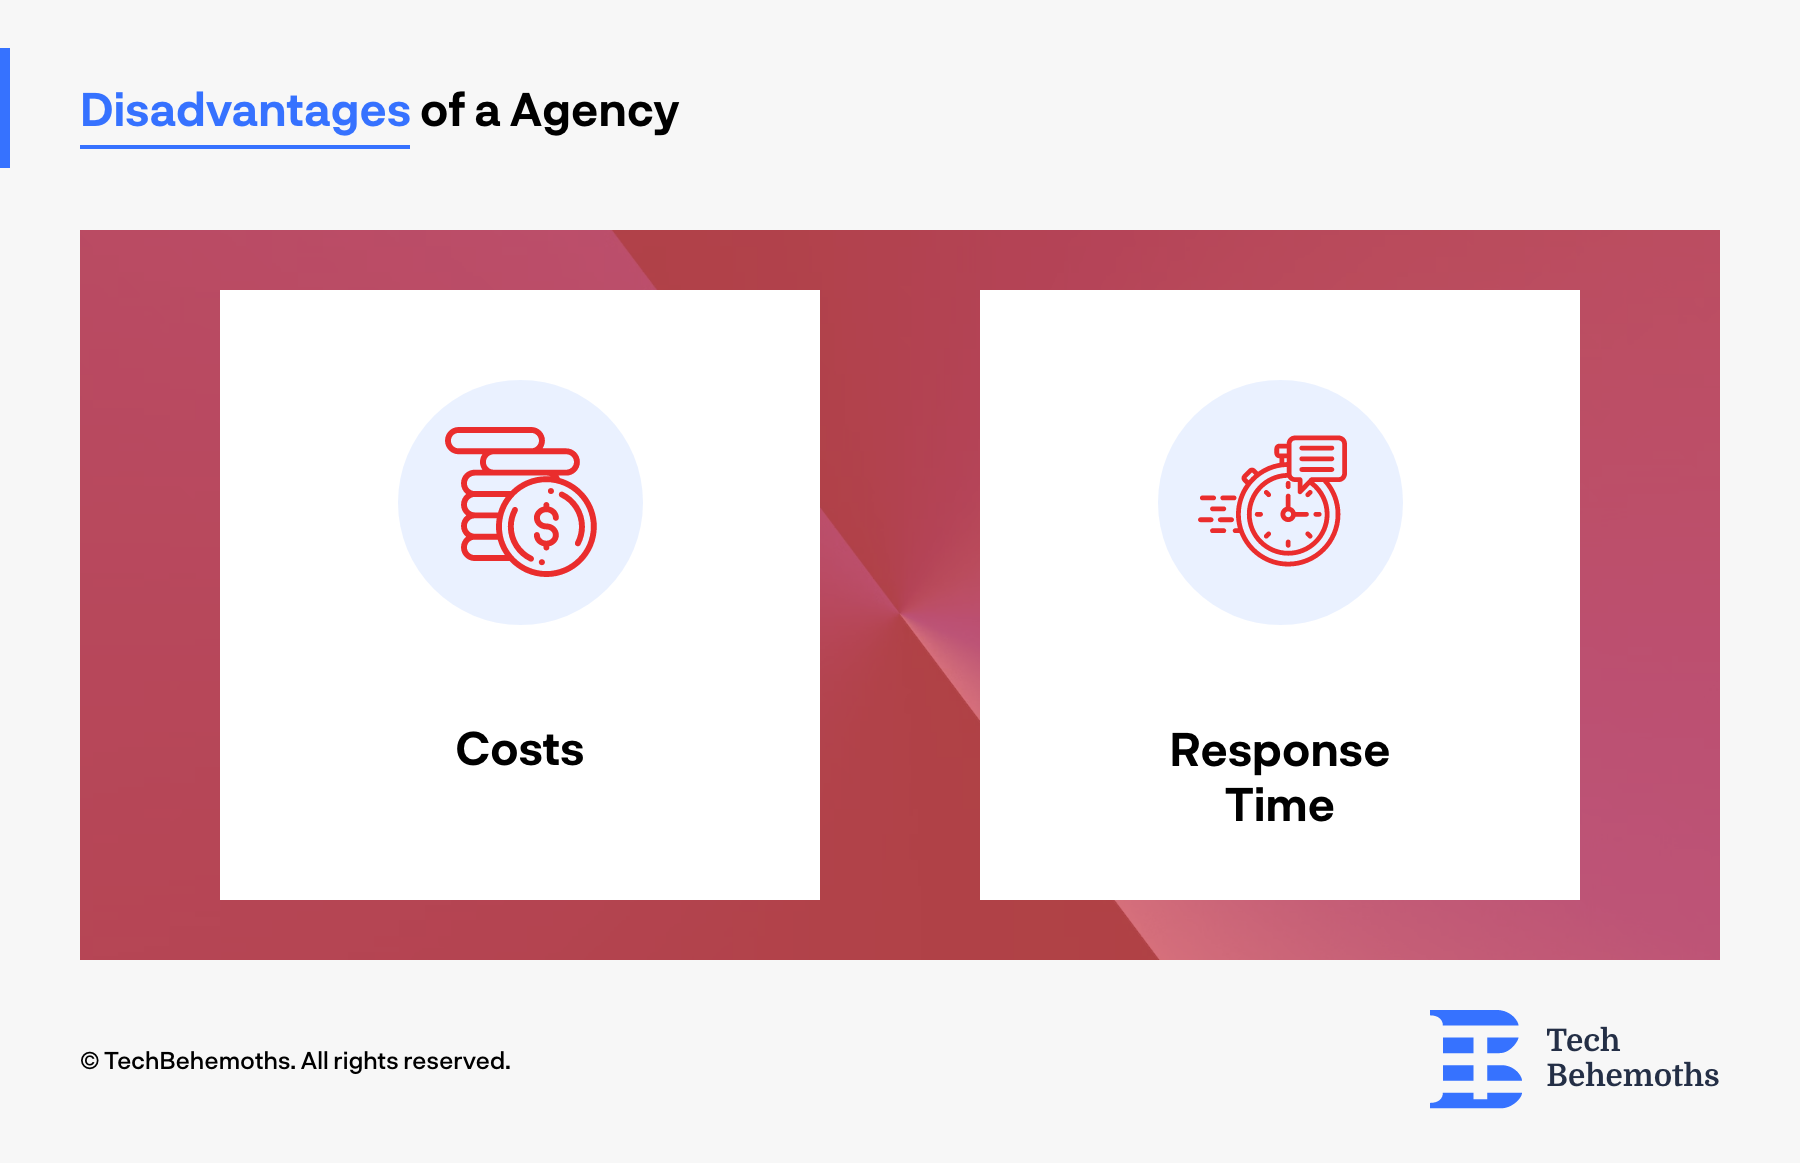 Disadvantages of hiring an agency